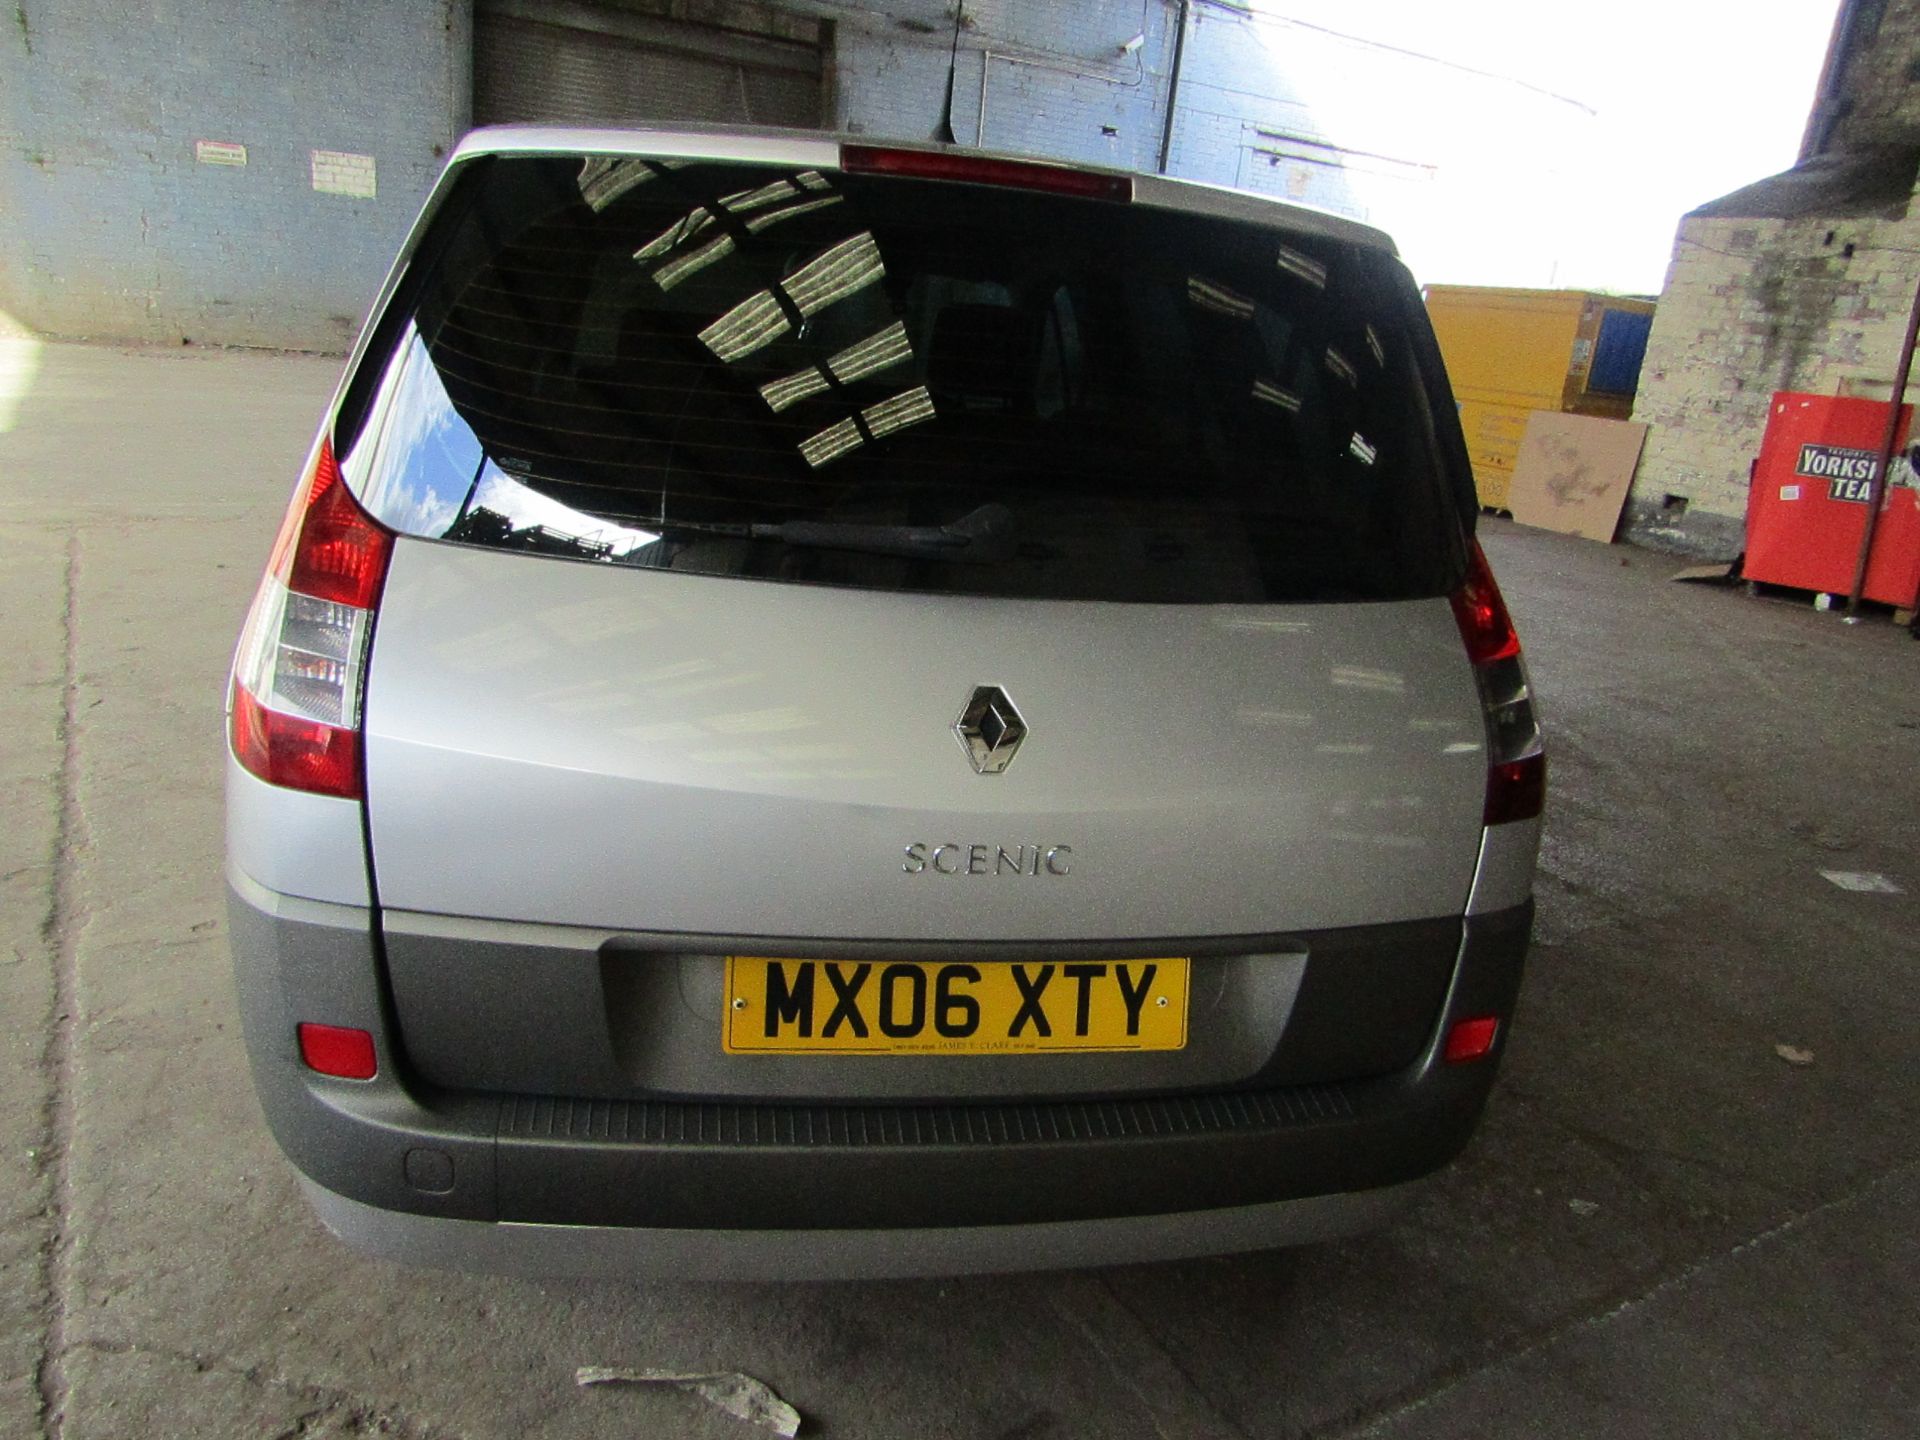 06 Plate Renault Megane Scenic 1.9 diesel, 7 Seats, 2 Keys, 82,793 miles appears to match up with - Image 3 of 15